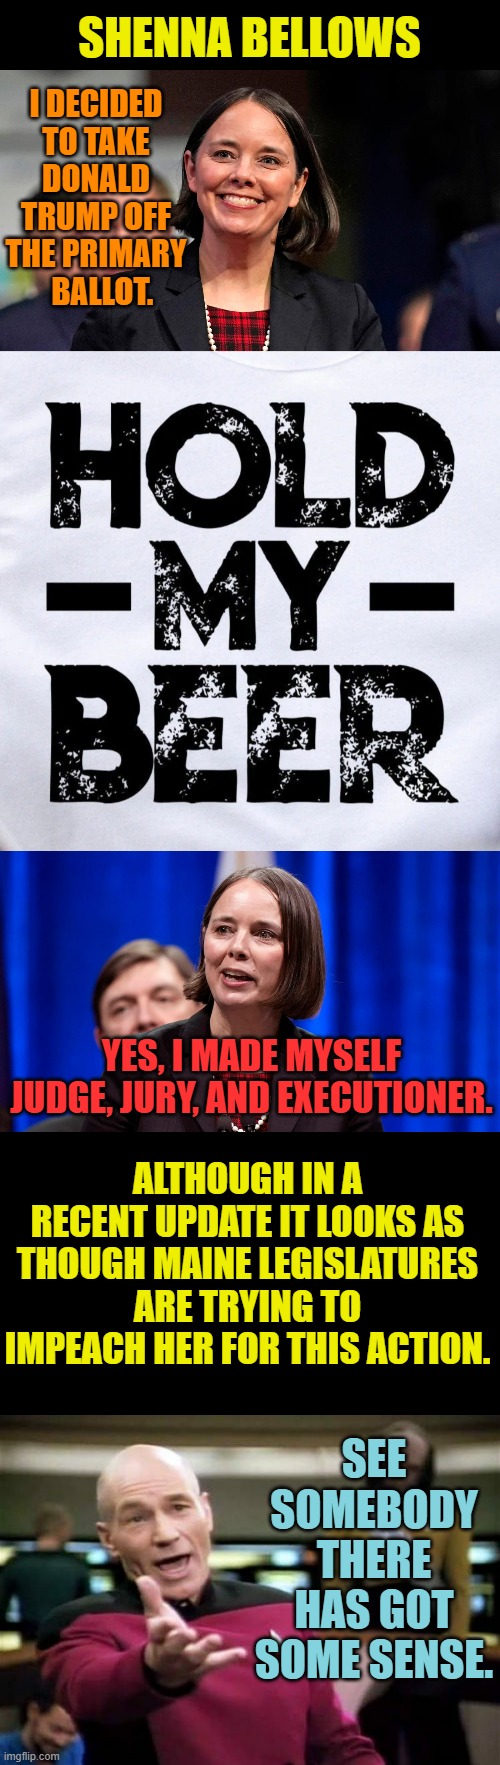 Maine Secretary Of State | SHENNA BELLOWS; I DECIDED TO TAKE DONALD TRUMP OFF THE PRIMARY   BALLOT. YES, I MADE MYSELF JUDGE, JURY, AND EXECUTIONER. ALTHOUGH IN A RECENT UPDATE IT LOOKS AS THOUGH MAINE LEGISLATURES ARE TRYING TO IMPEACH HER FOR THIS ACTION. SEE SOMEBODY THERE HAS GOT SOME SENSE. | image tagged in memes,politics,donald trump,votes,hold my beer,impeachment | made w/ Imgflip meme maker